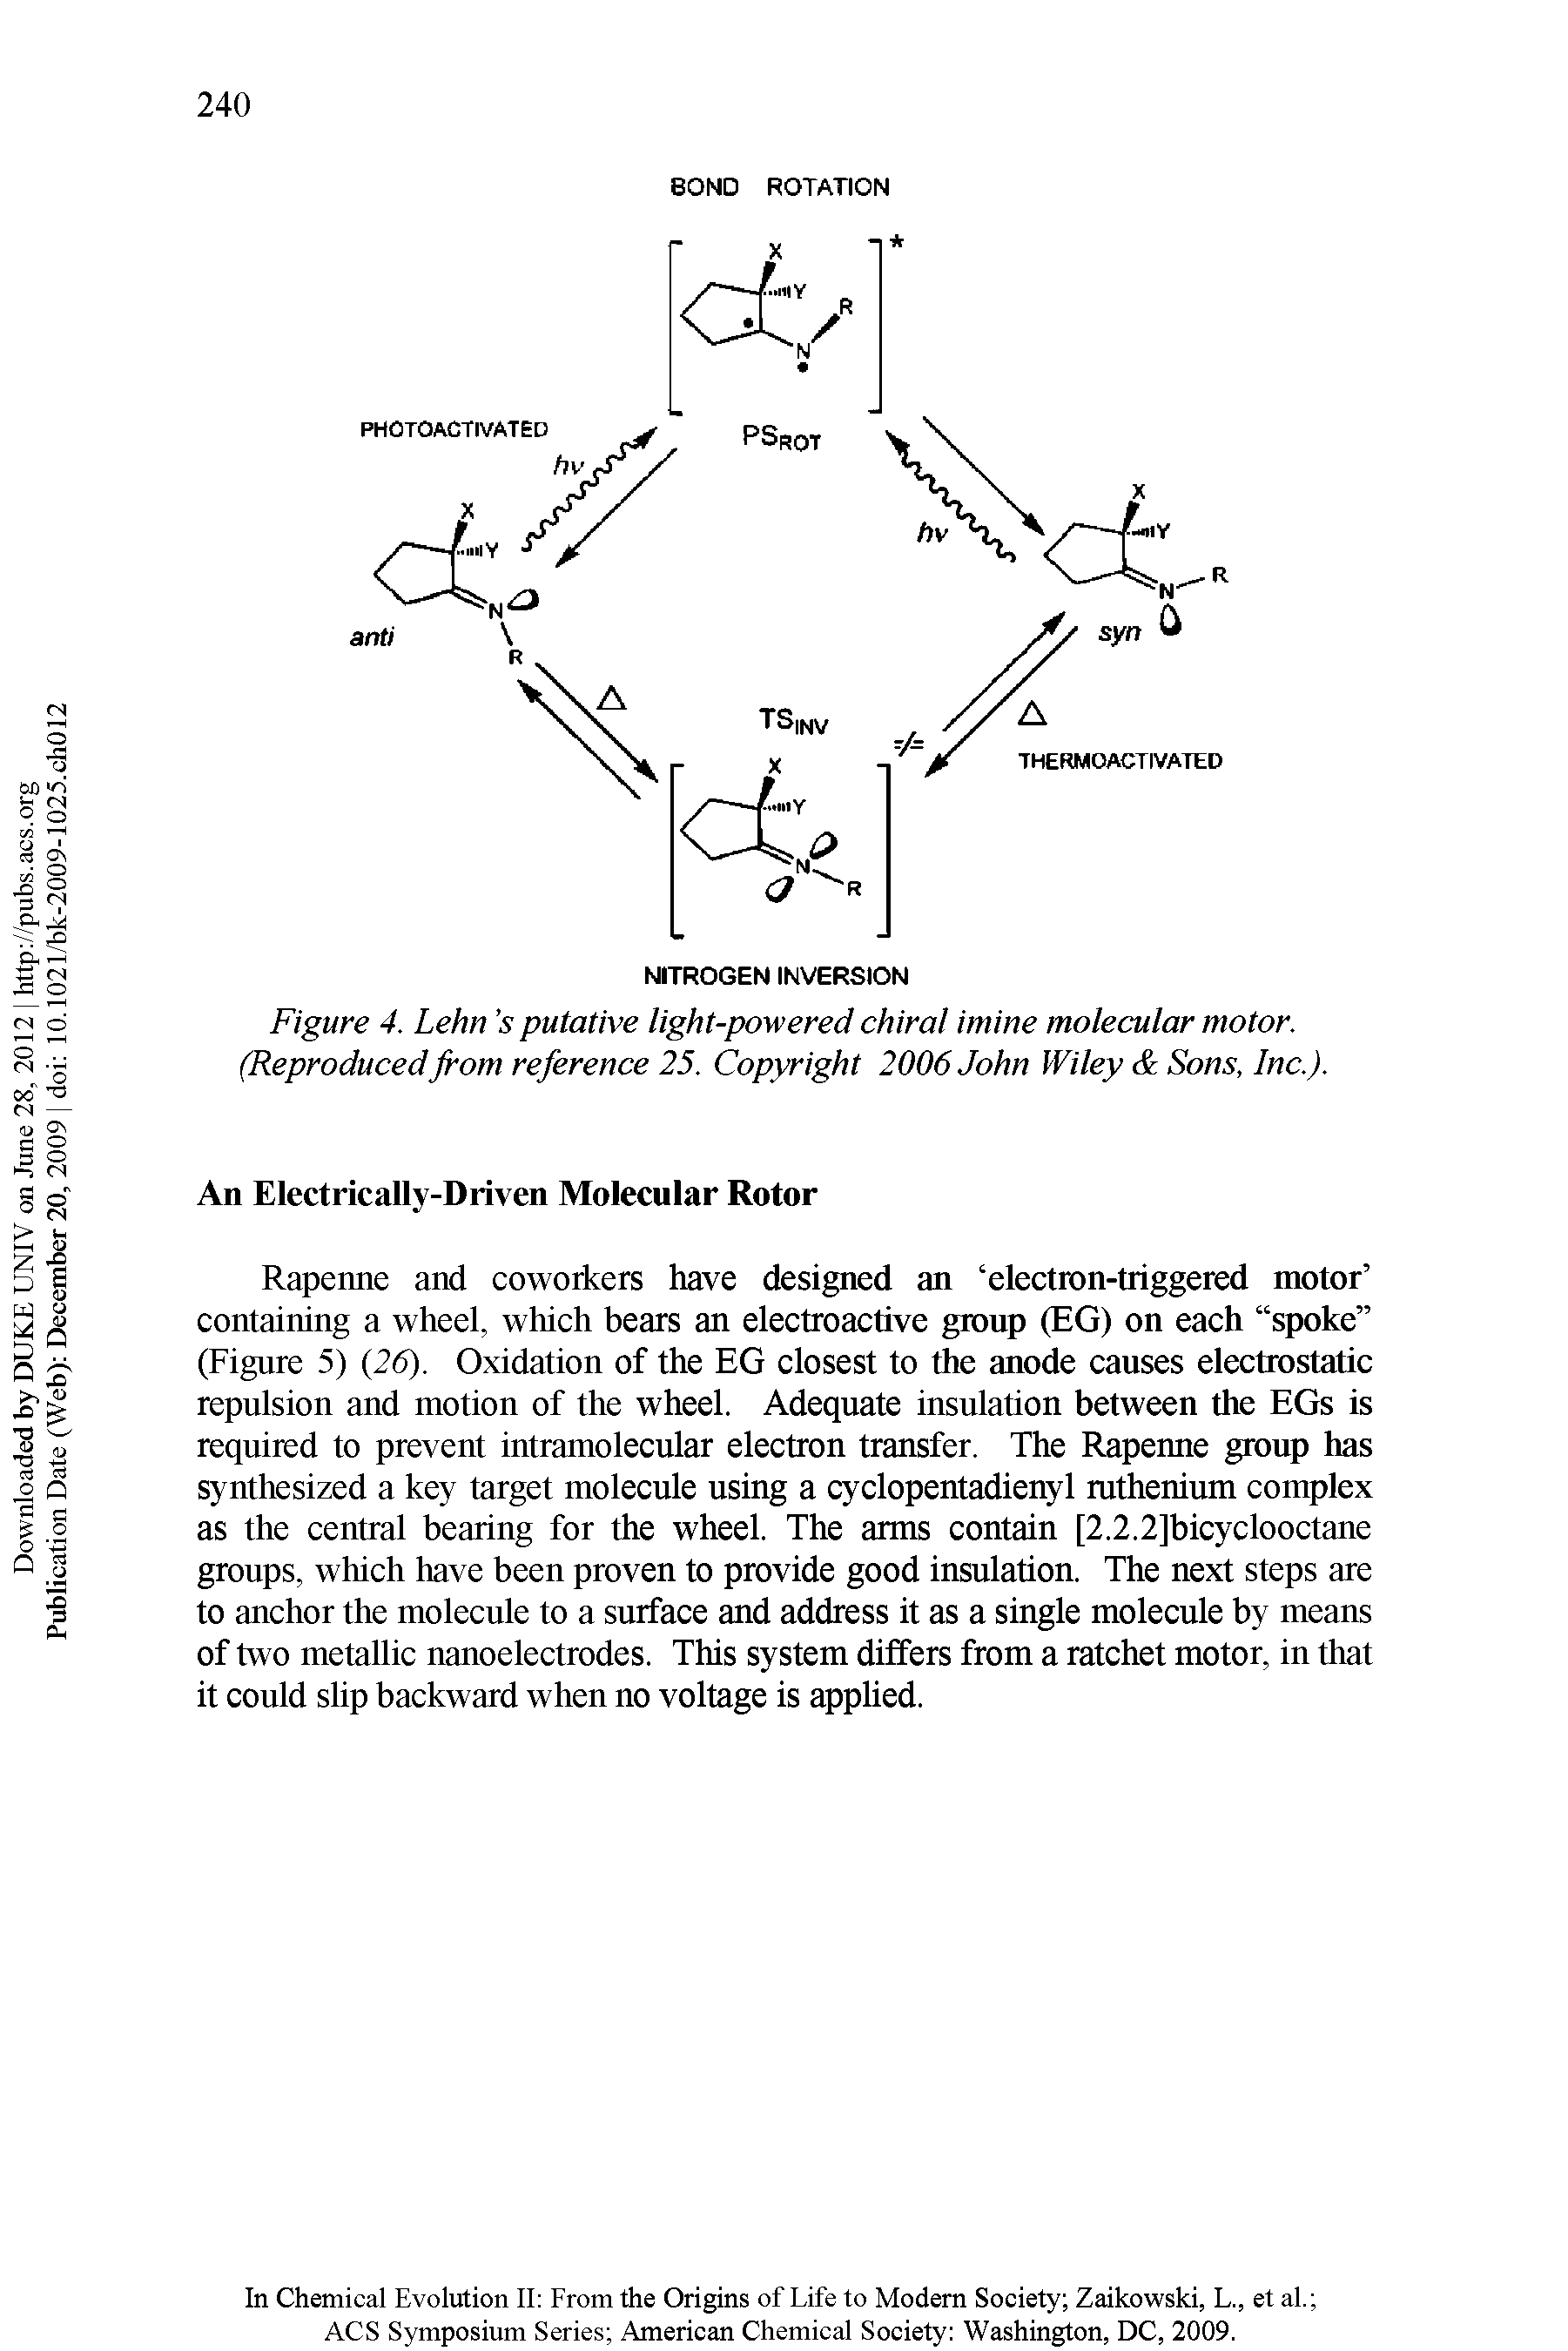 Figure 4. Lehn s putative light-powered chiral inline molecular motor. (Reproducedfrom reference 25. Copyright 2006 John Wiley Sons, Inc.).